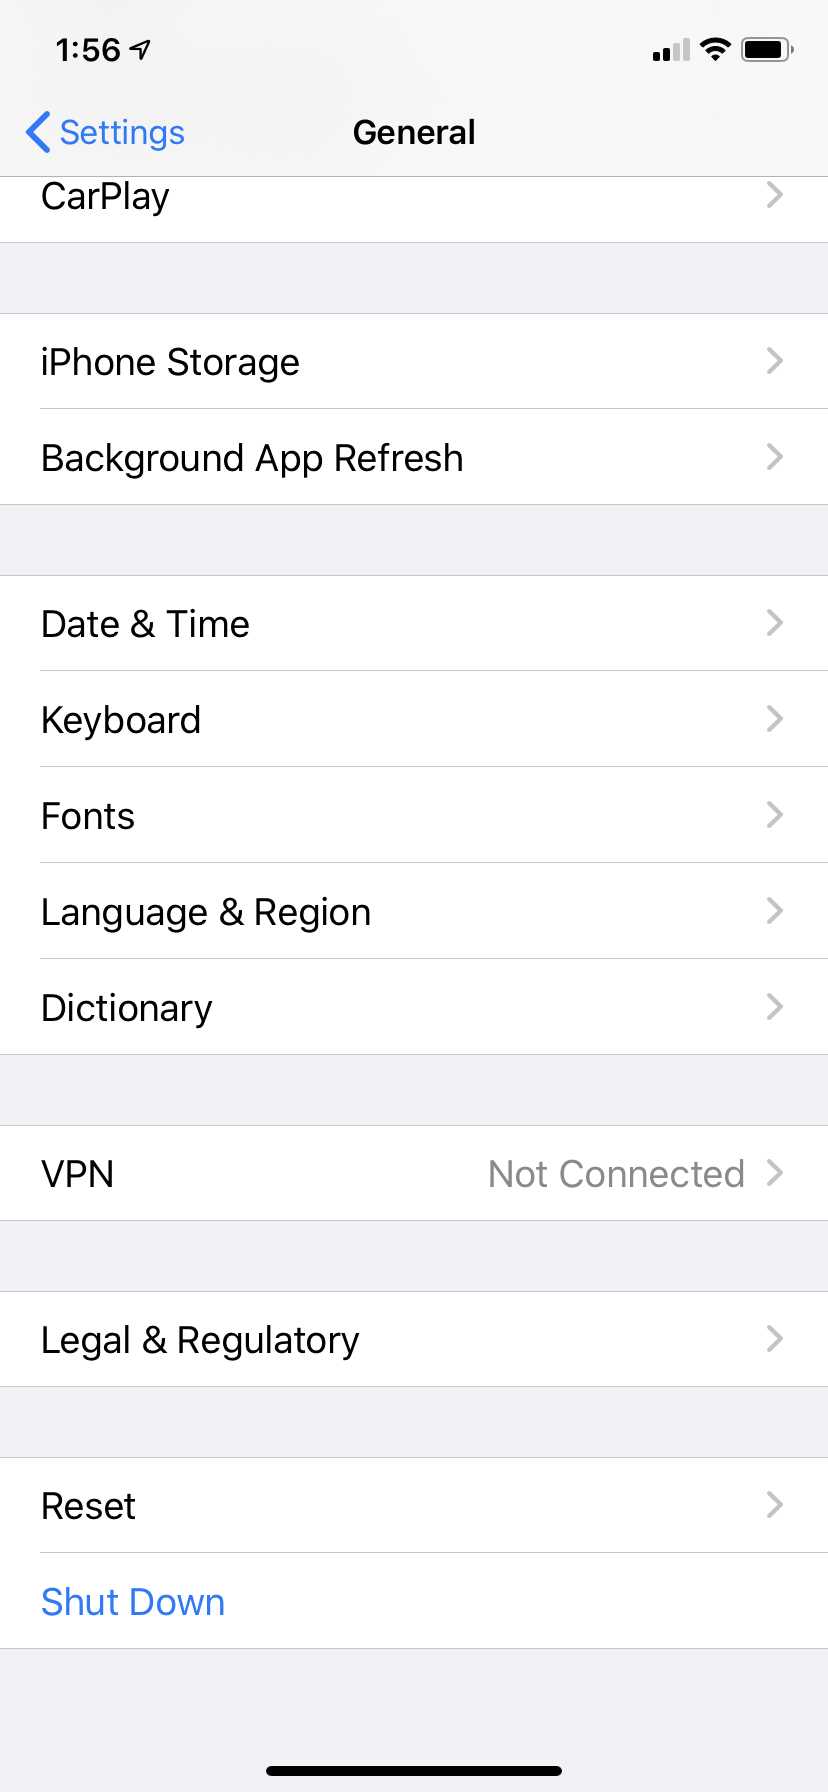 Look for Reset under the General Settings on iOS device